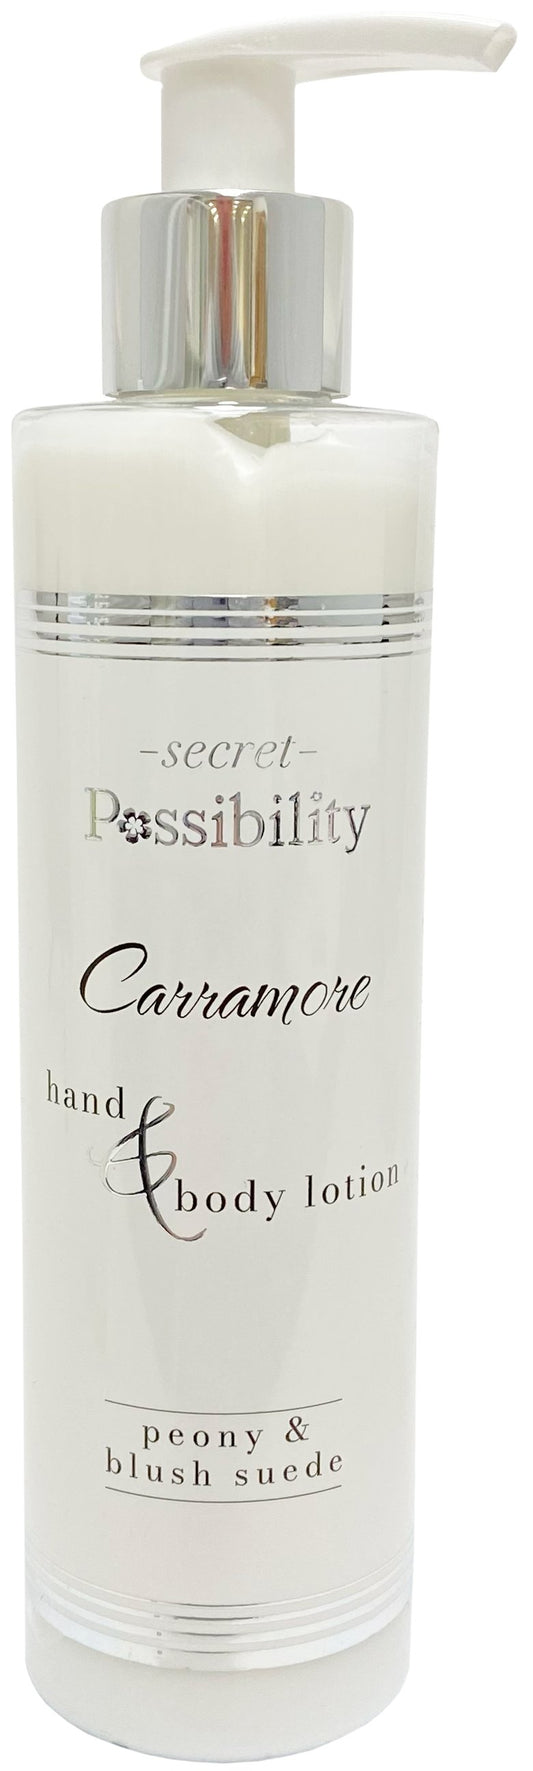 Possibility Secret Hand & Body Lotion Carramore W Peony & Blush Suede